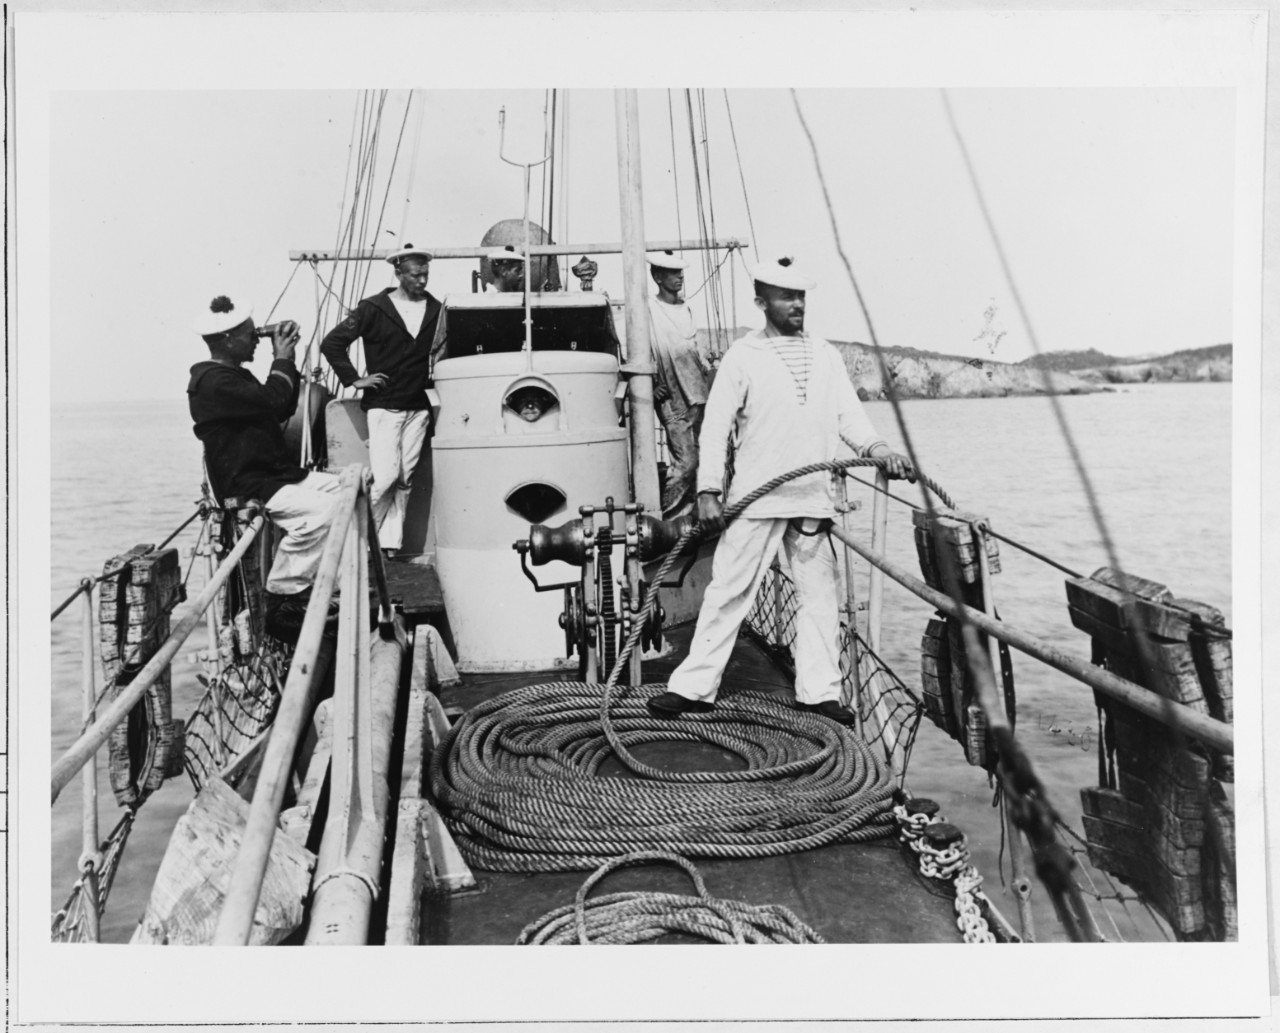 French sailors aboard TORPILLEUR 143 (French torpedo boat, 1890)